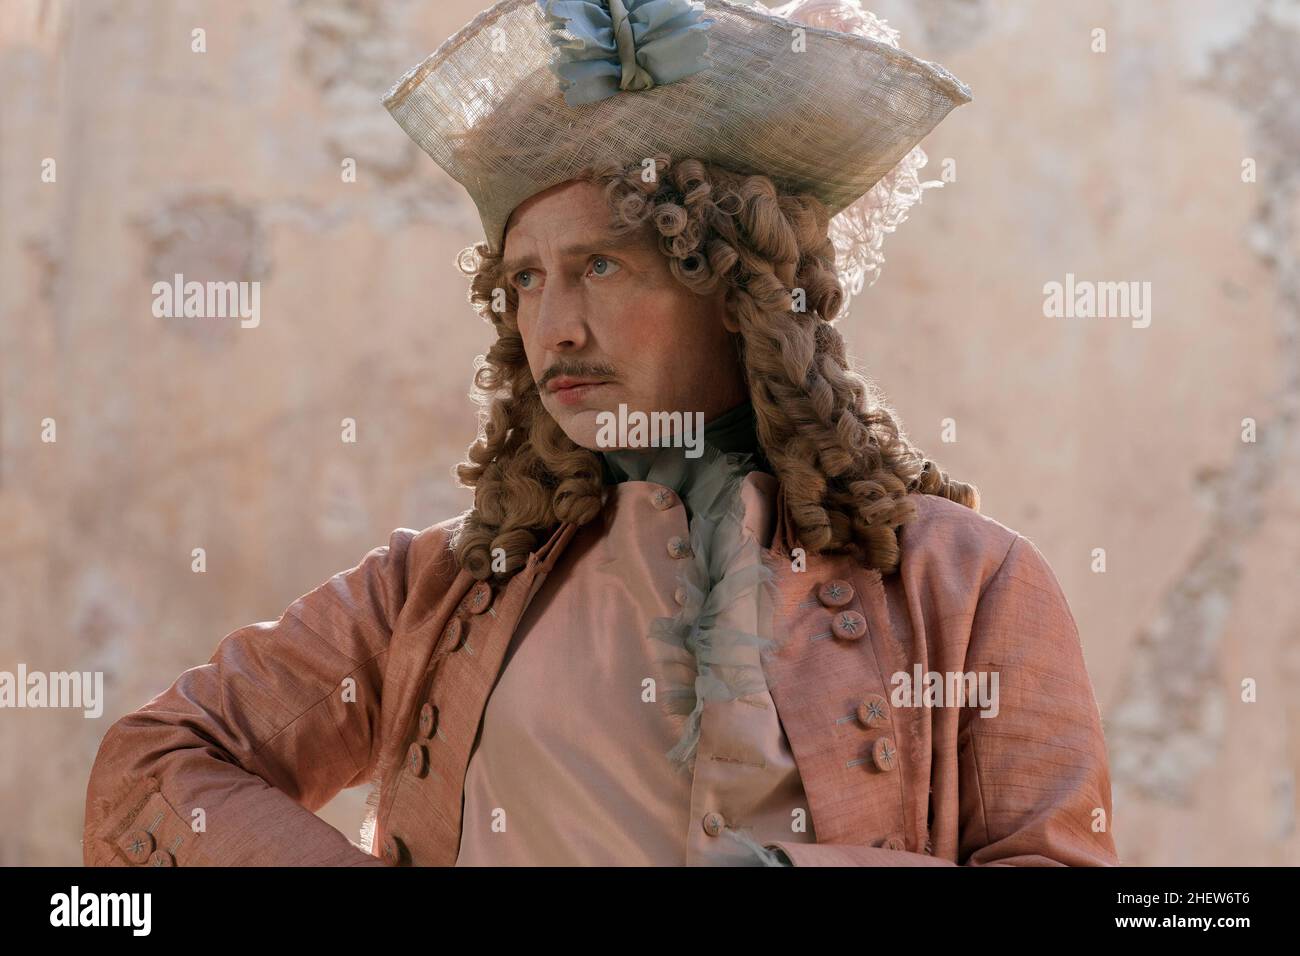 RELEASE DATE: December 25. 2021 TITLE: Cyrano STUDIO: MGM DIRECTOR: Joe Wright PLOT: Too self-conscious to woo Roxanne himself, wordsmith Cyrano de Bergerac helps young Christian nab her heart through love letters. STARRING: BEN MENDELSOHN as De Guiche. (Credit Image: © MGM/Entertainment Pictures) Stock Photo